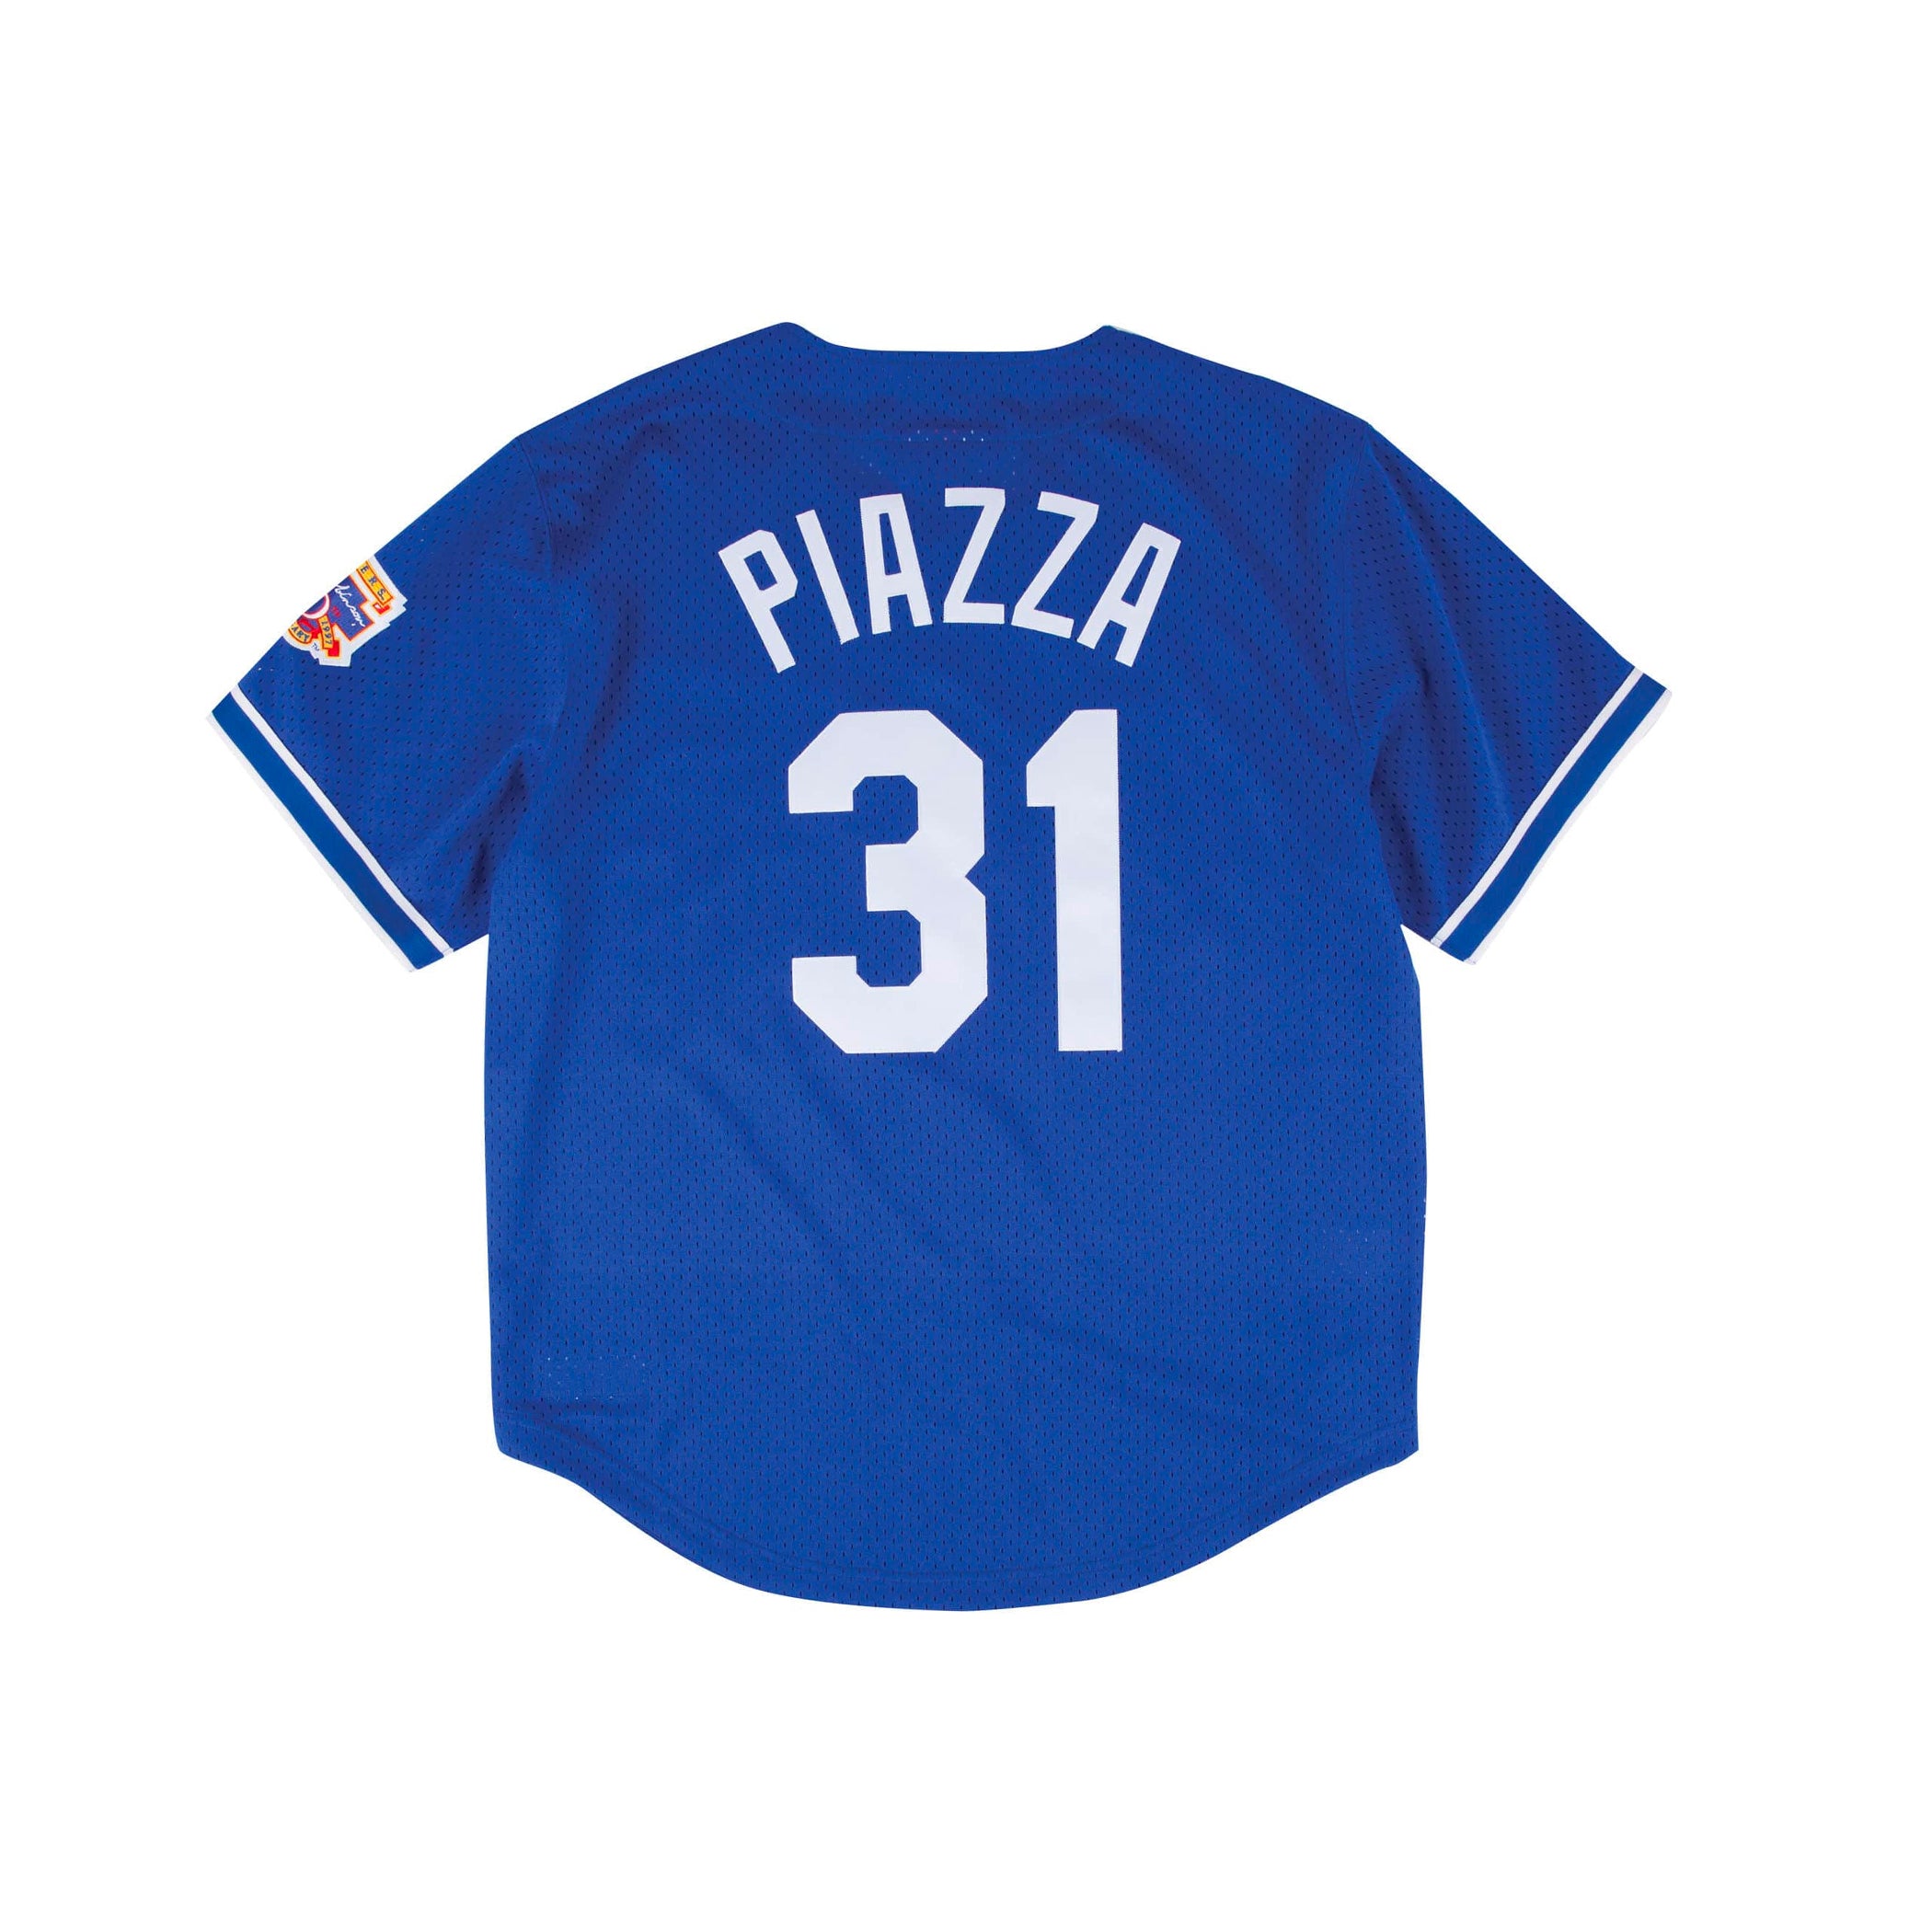 dodgers mike piazza jersey